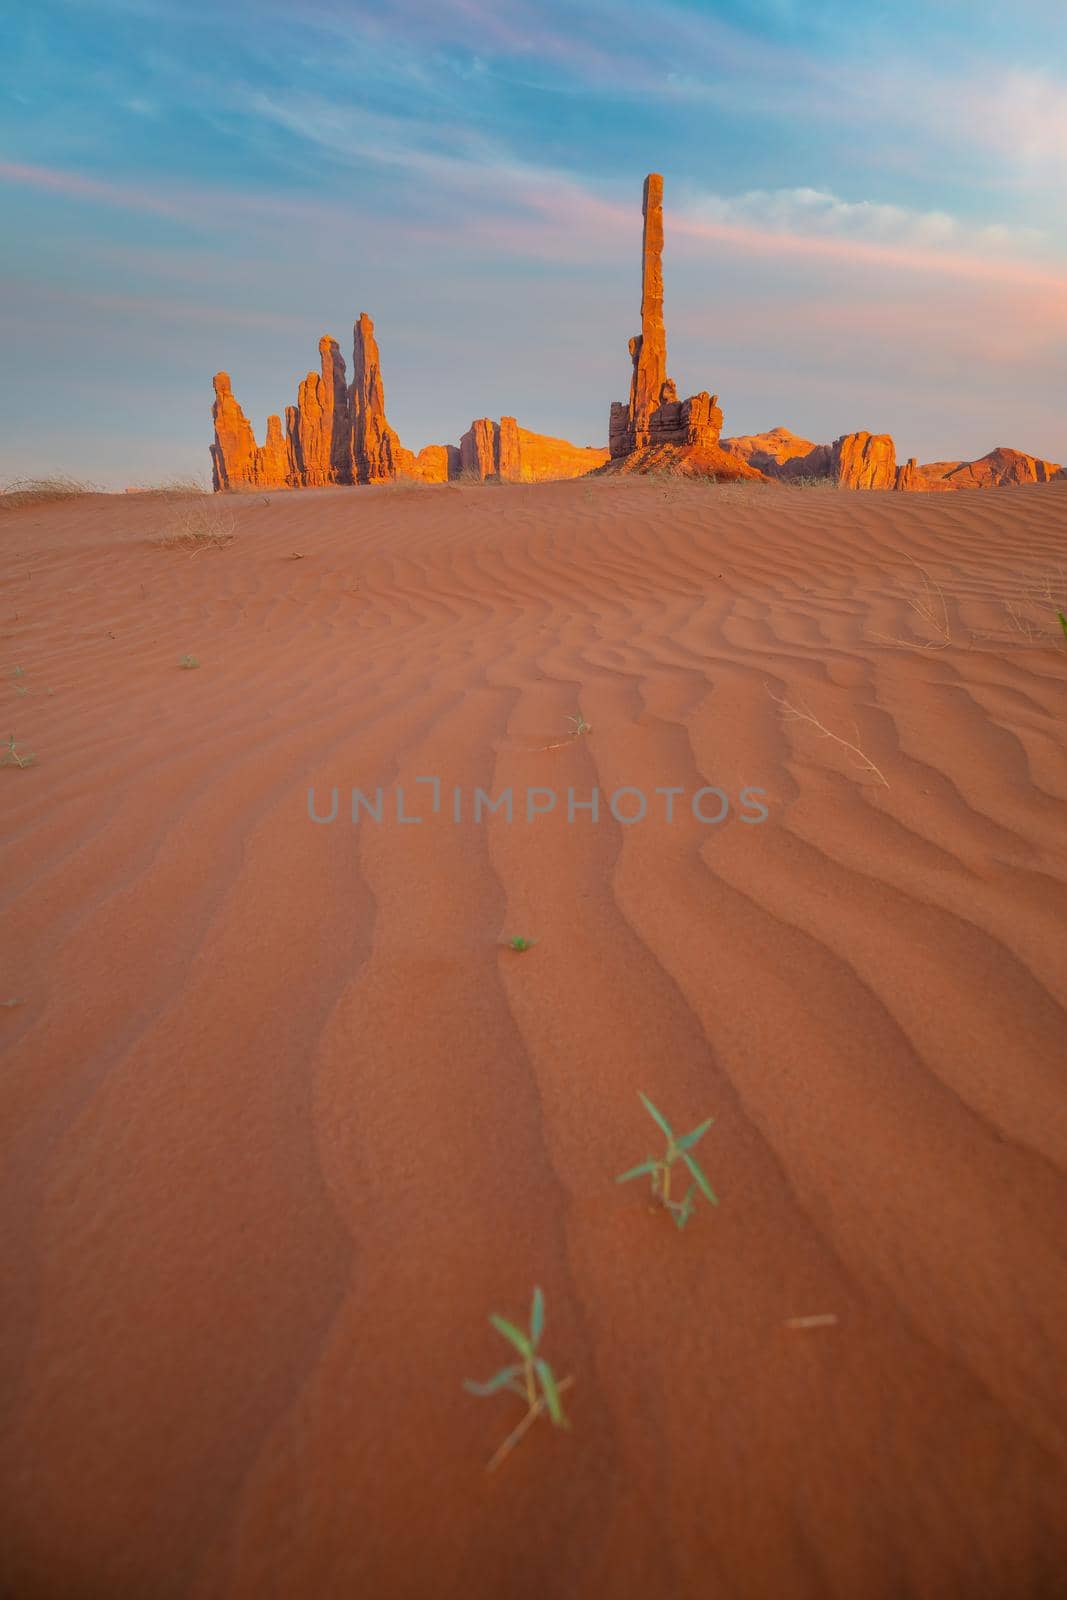 Totem pole and sand dunes  in Monument Valley, Arizona USA  by f11photo